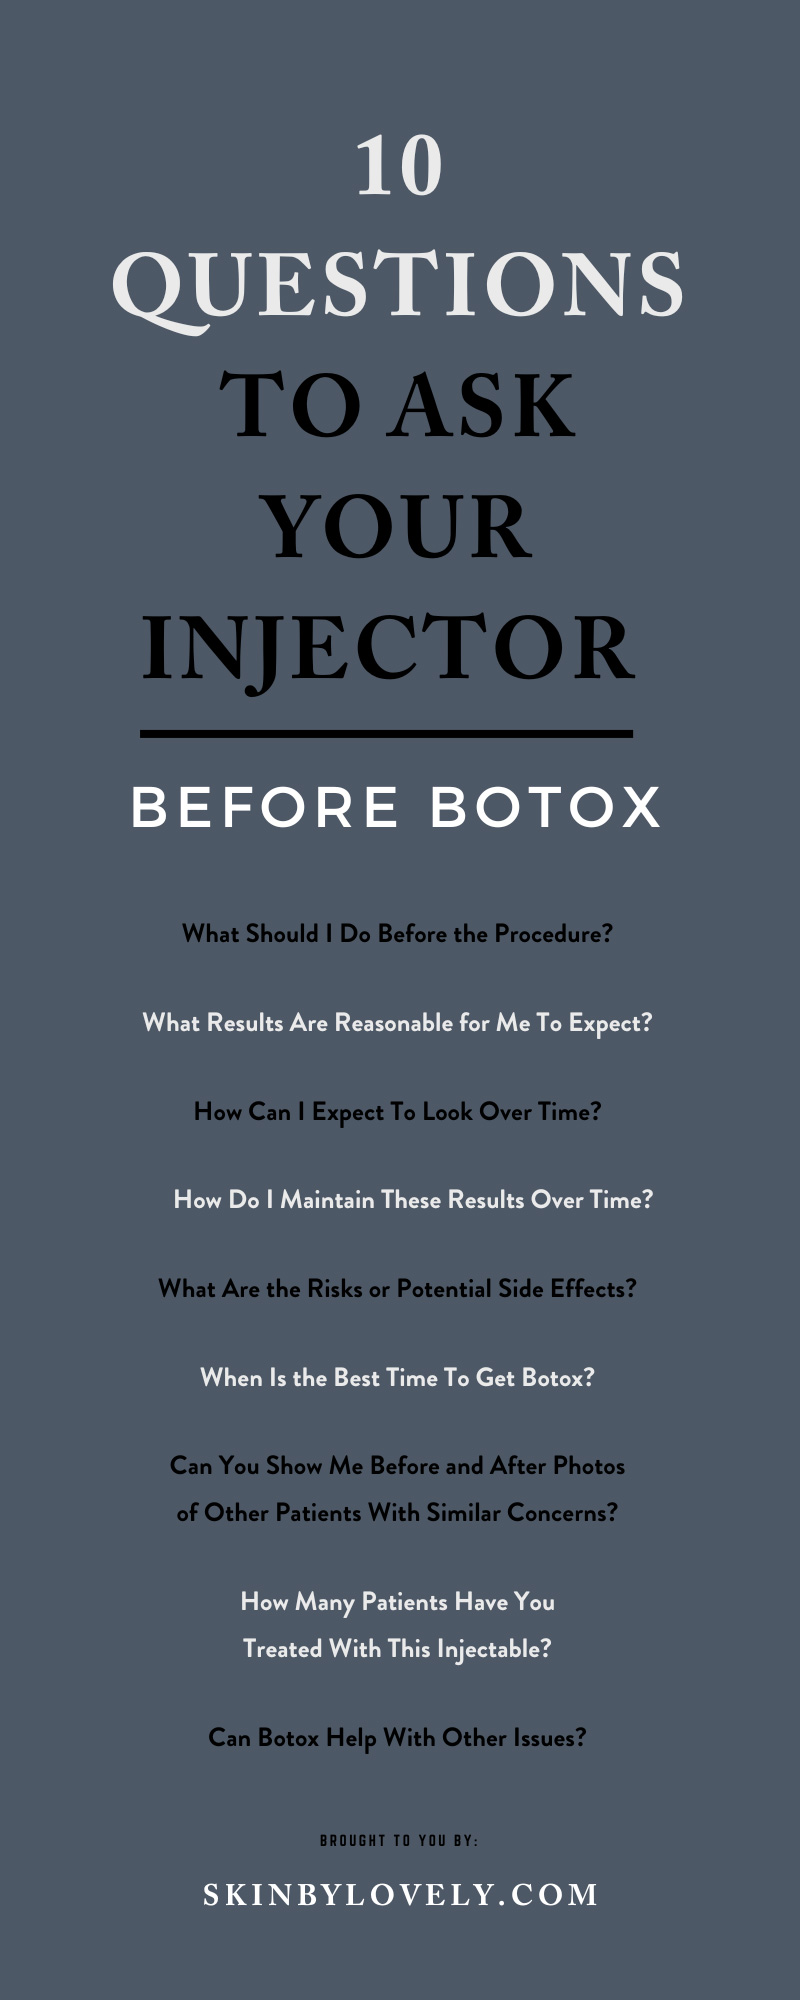 10 Questions To Ask Your Injector Before Botox